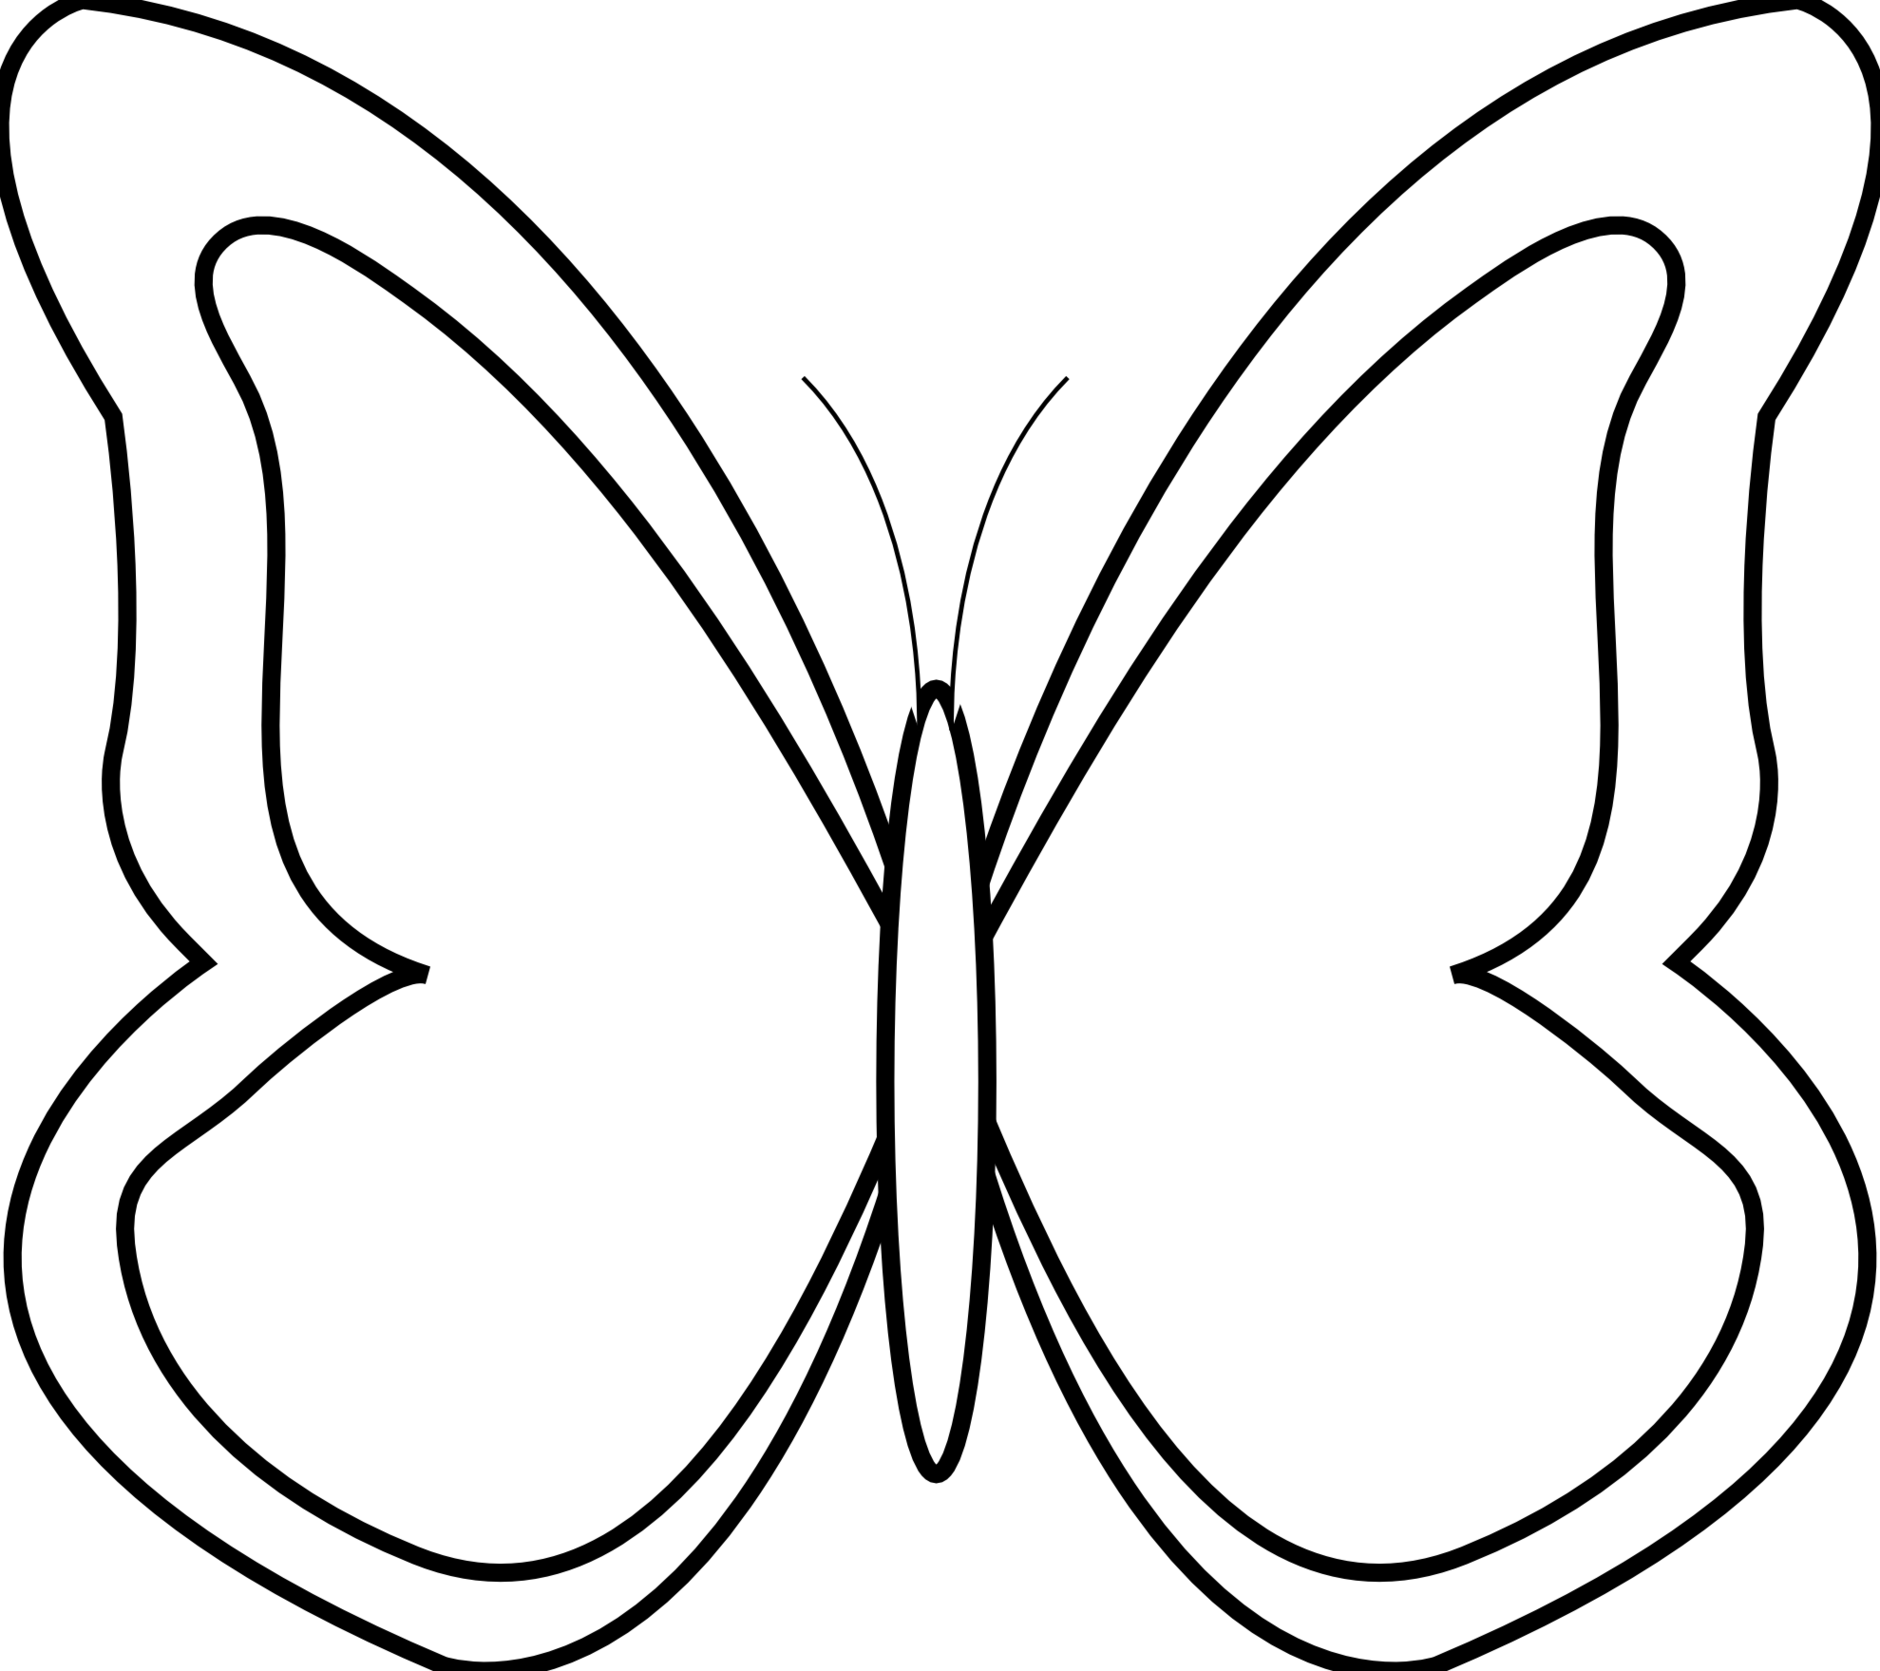 The Black Butterfly Clipart - Free to use Clip Art Resource